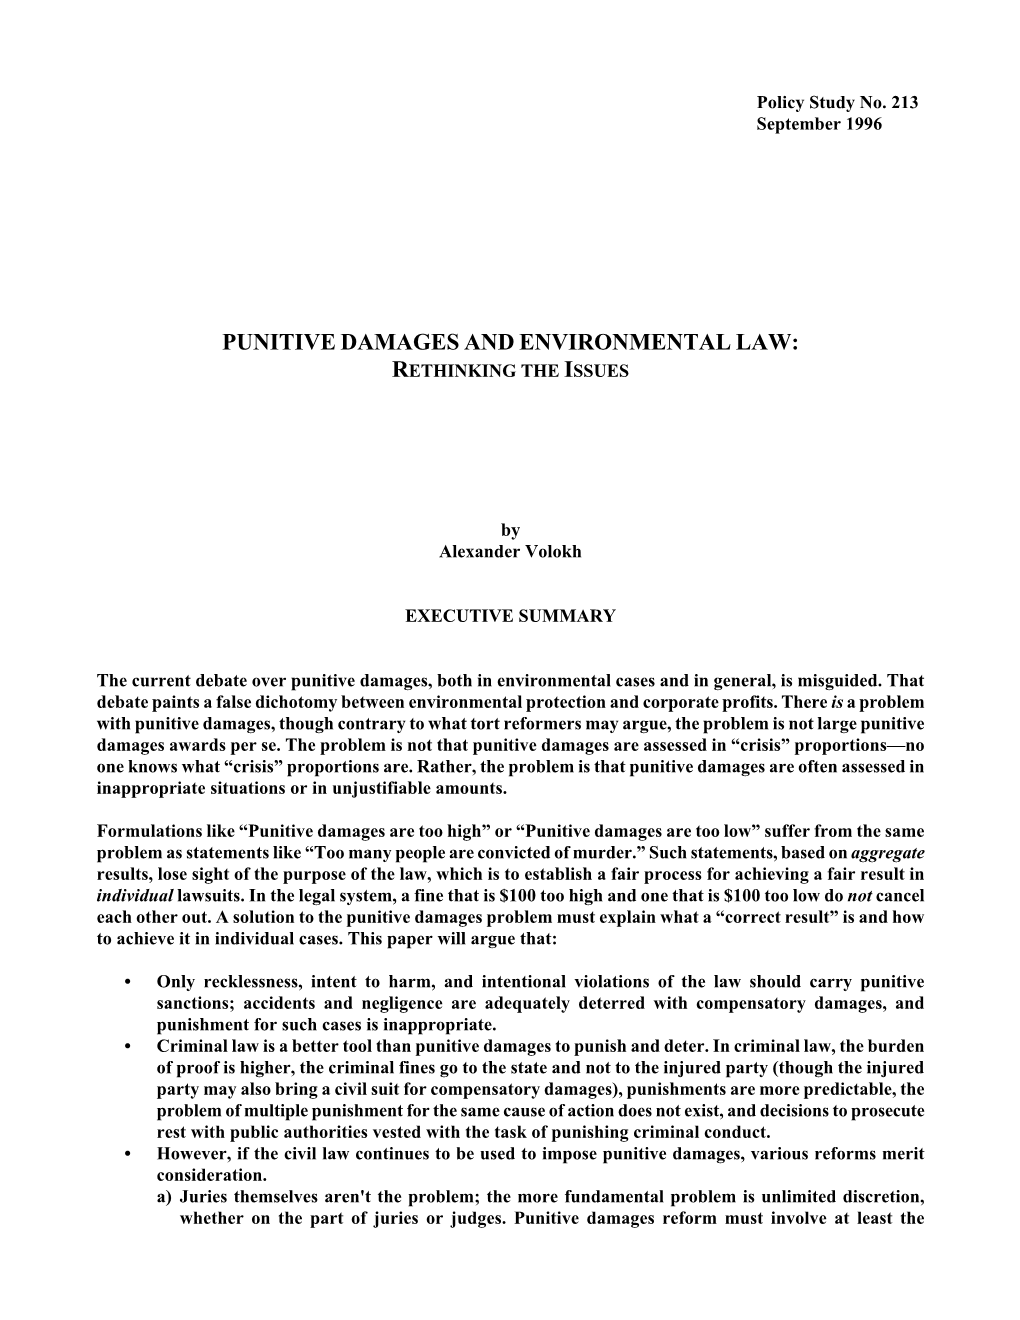 Punitive Damages and Environmental Law: Rethinking the Issues